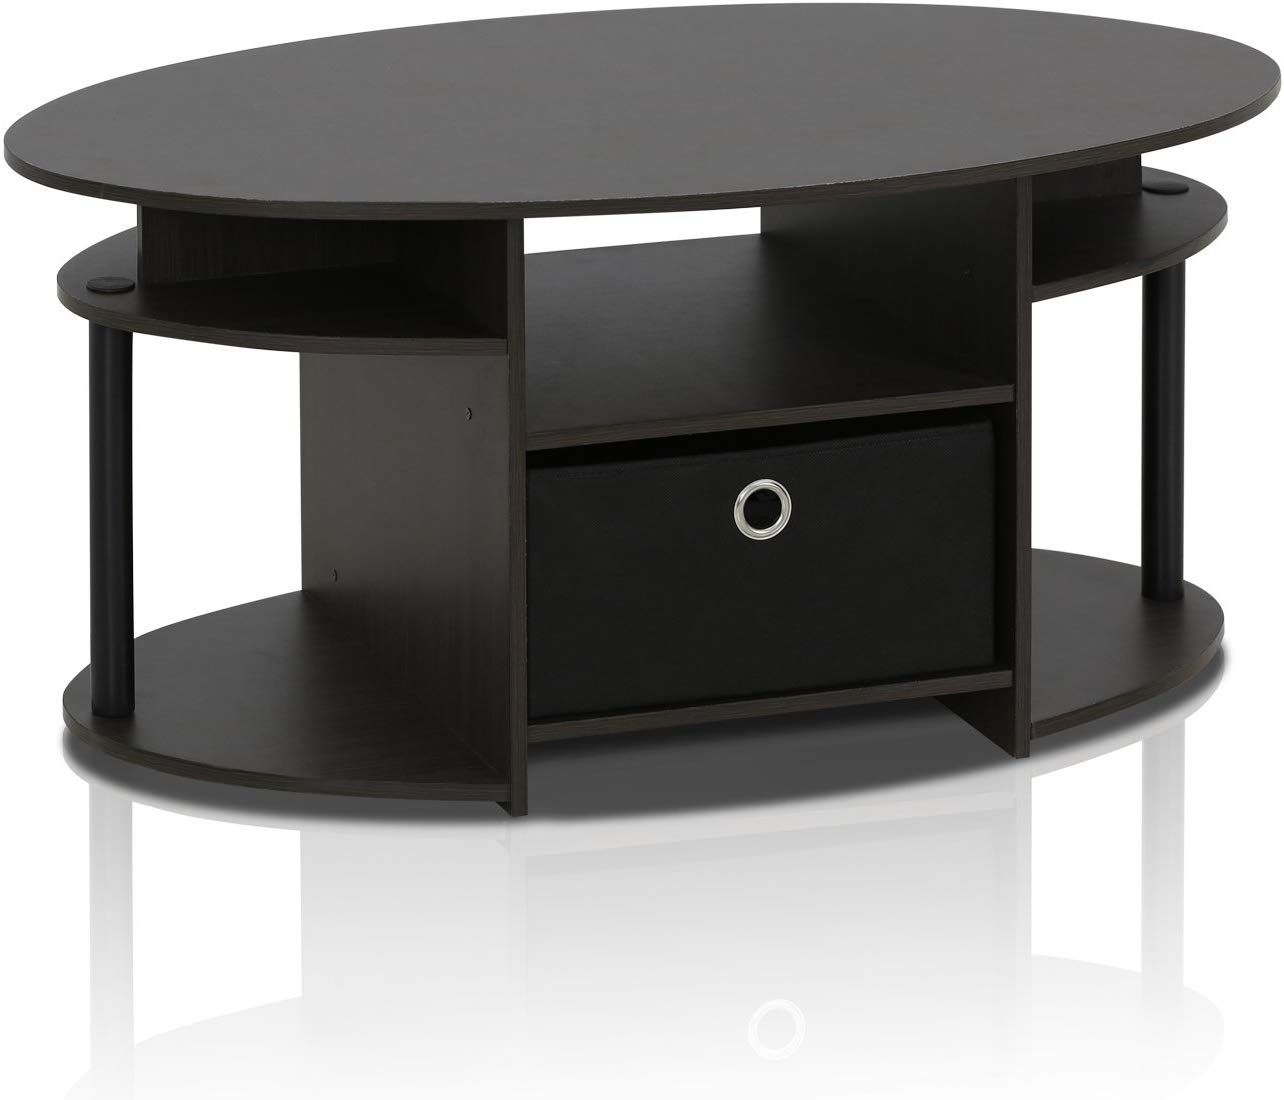 Black Coffee Table With Storage, Wood Look Accent Throughout Aged Black Coffee Tables (View 11 of 15)